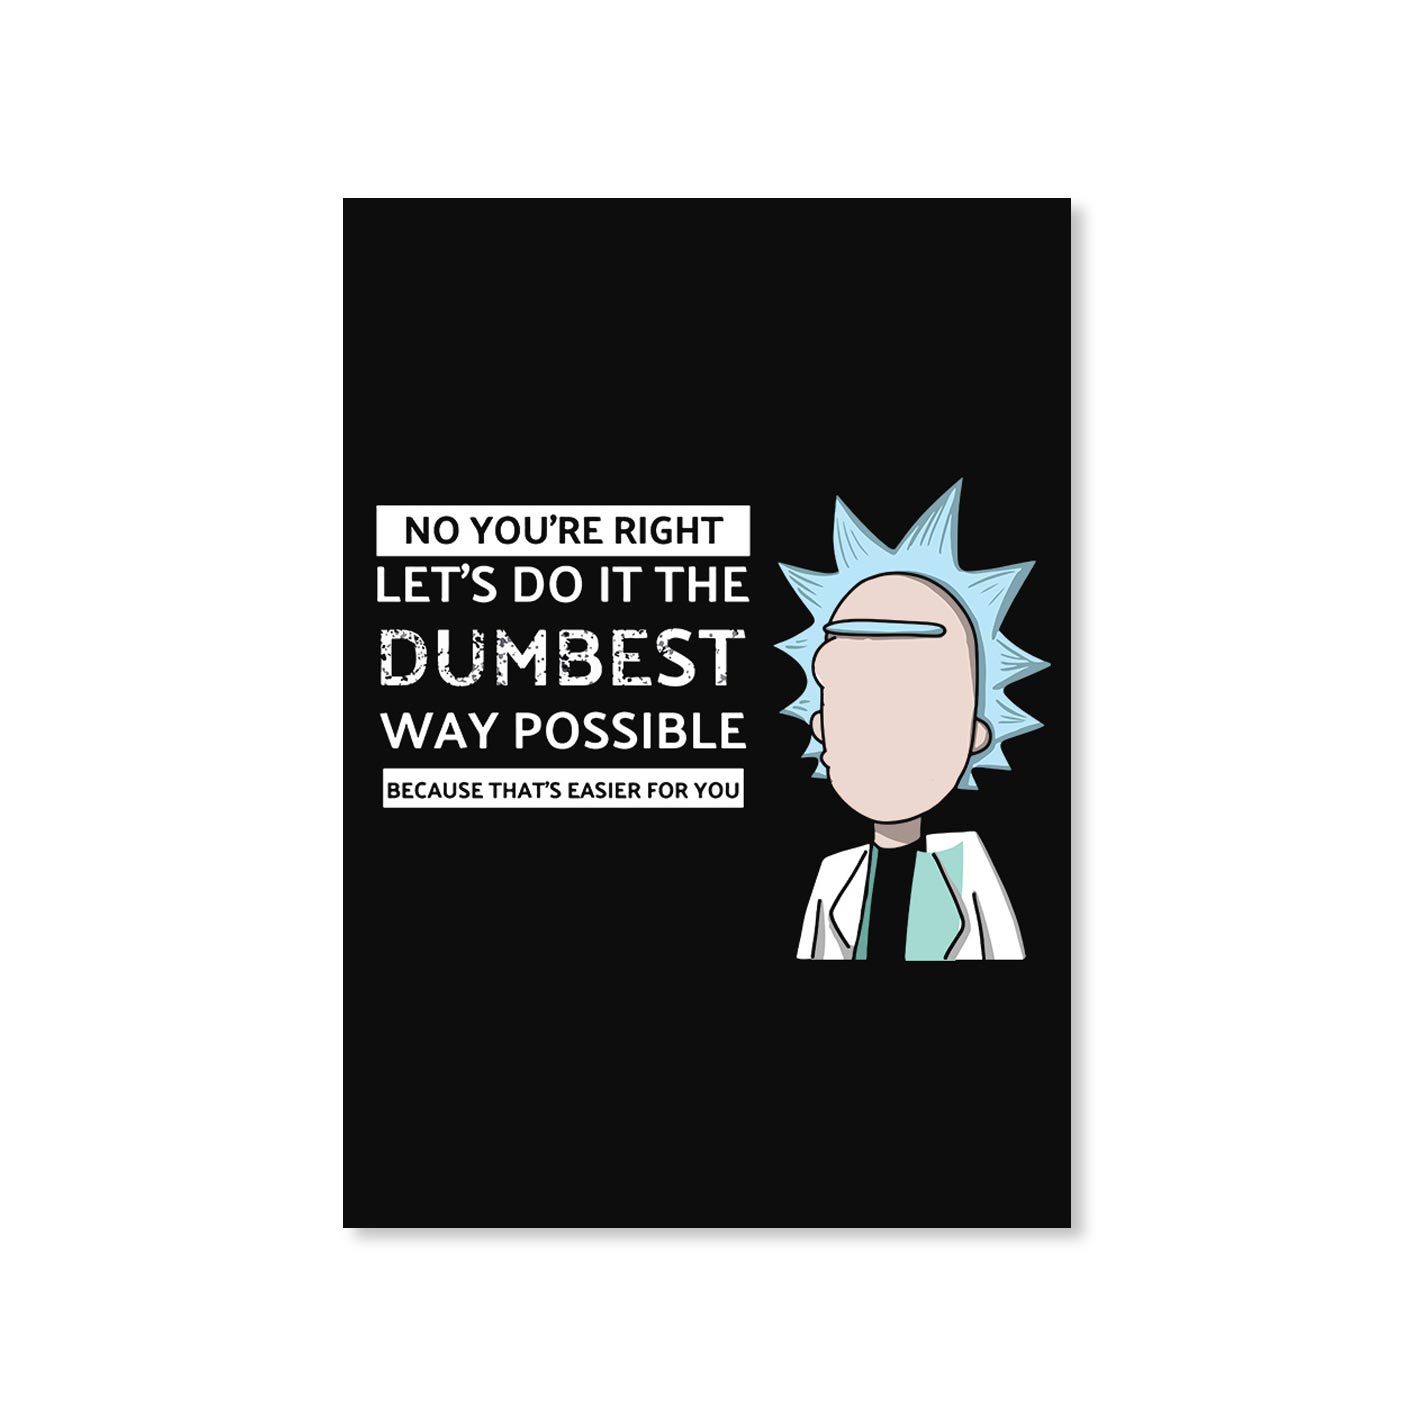 rick and morty dumbest way poster wall art buy online india the banyan tee tbt a4 rick and morty online summer beth mr meeseeks jerry quote vector art clothing accessories merchandise